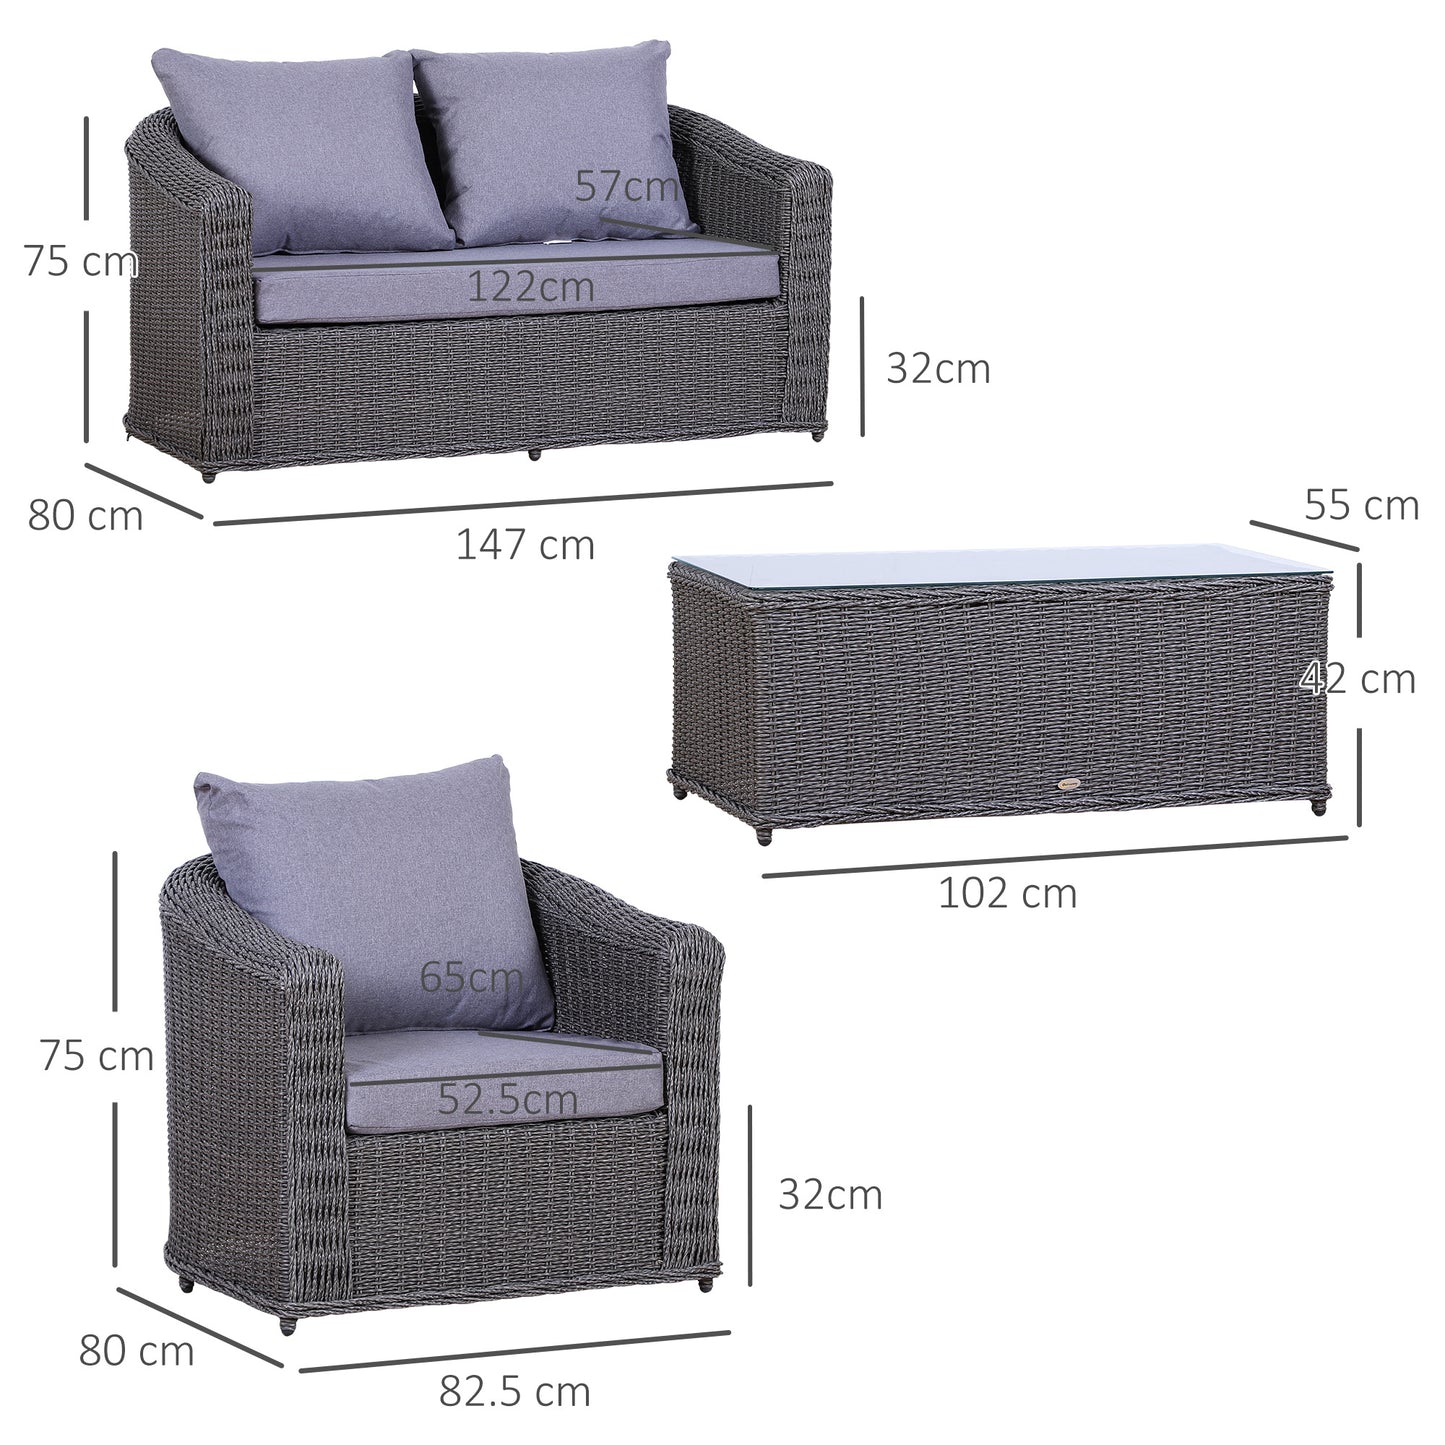 Outsunny Rattan Garden Furniture Set 4-seater Sofa Set Coffee Table Single Chair Bench Aluminium Frame Fully-assembly, Grey